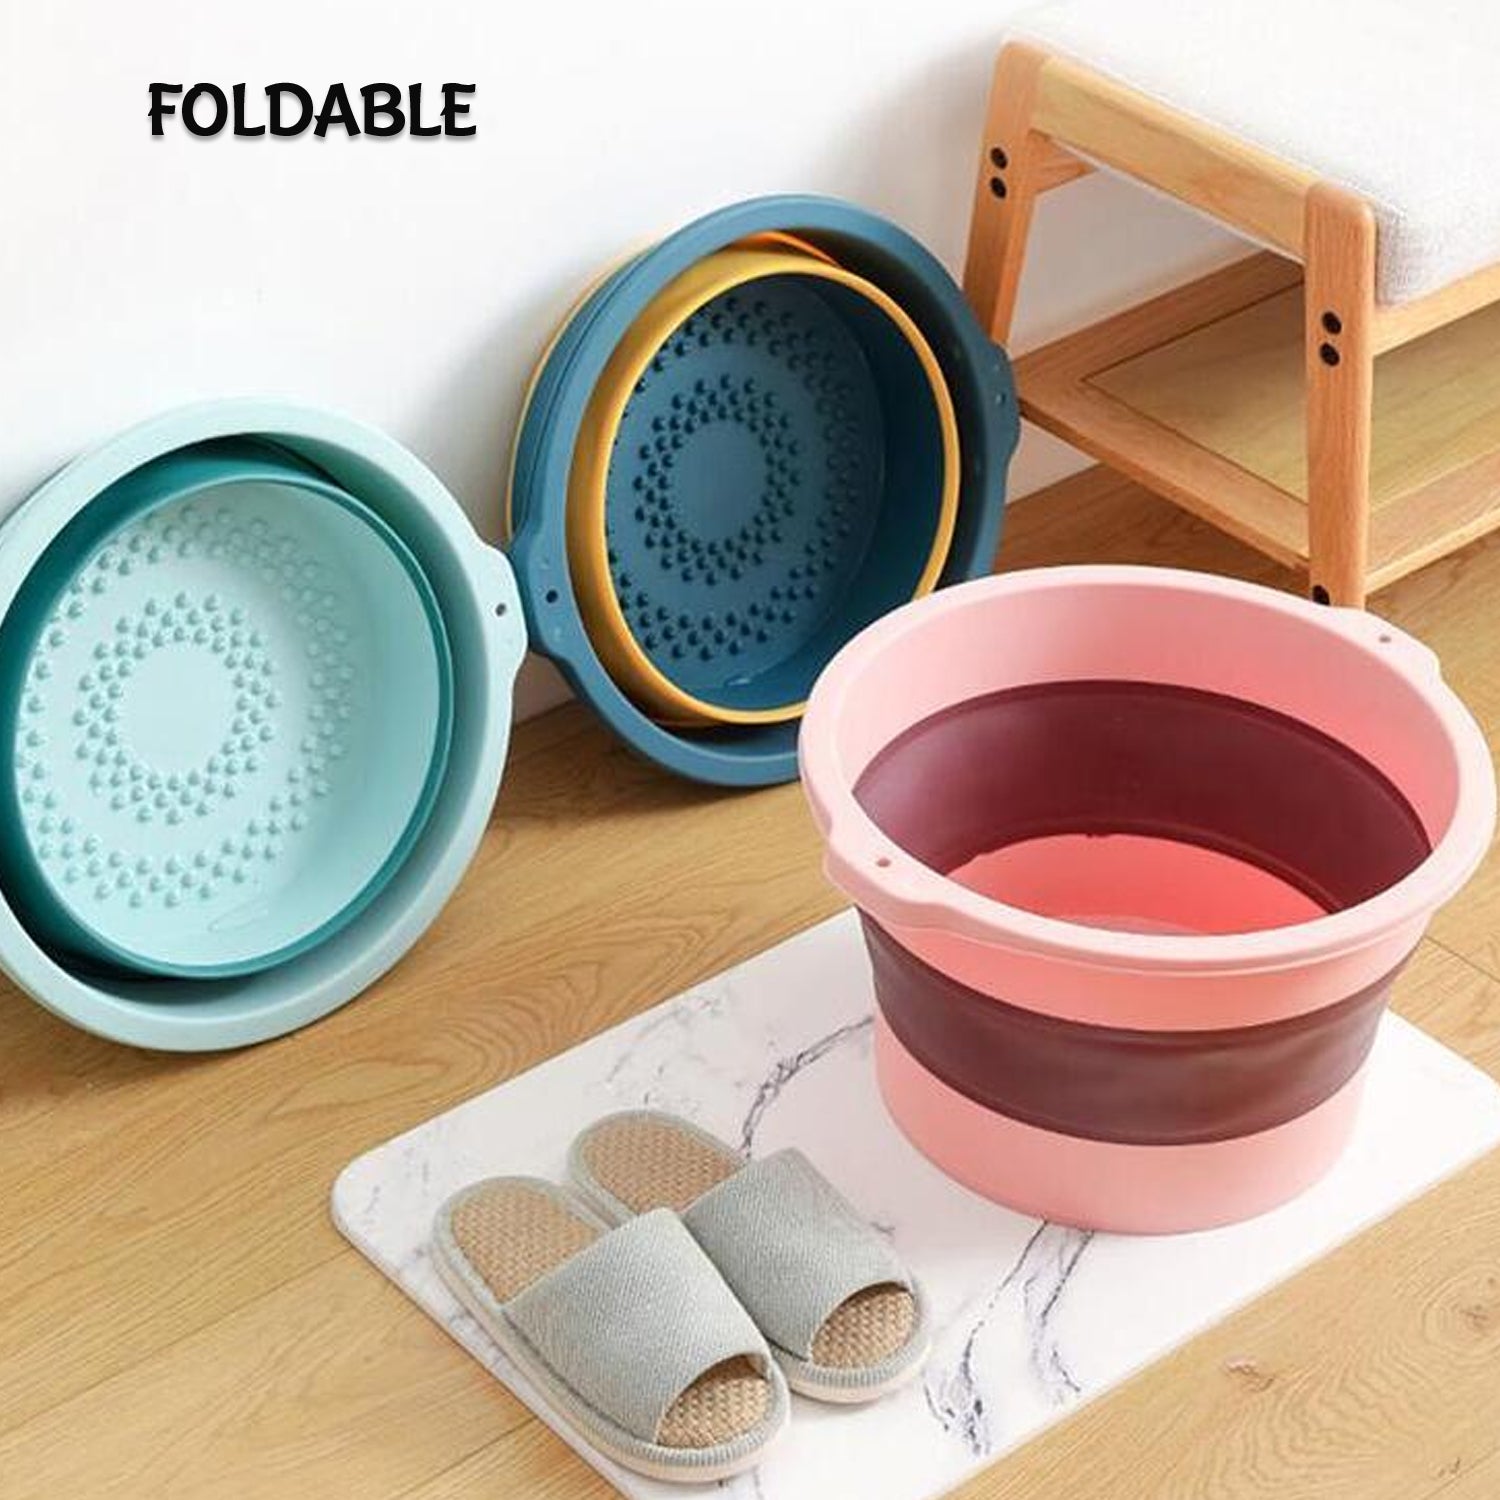 2786 Multi-Purpose Portable Collapsible Folding Tub, with Hanging Hole & Save Storage Space, Also use for Foot Spa. - China, 2.138 kgs